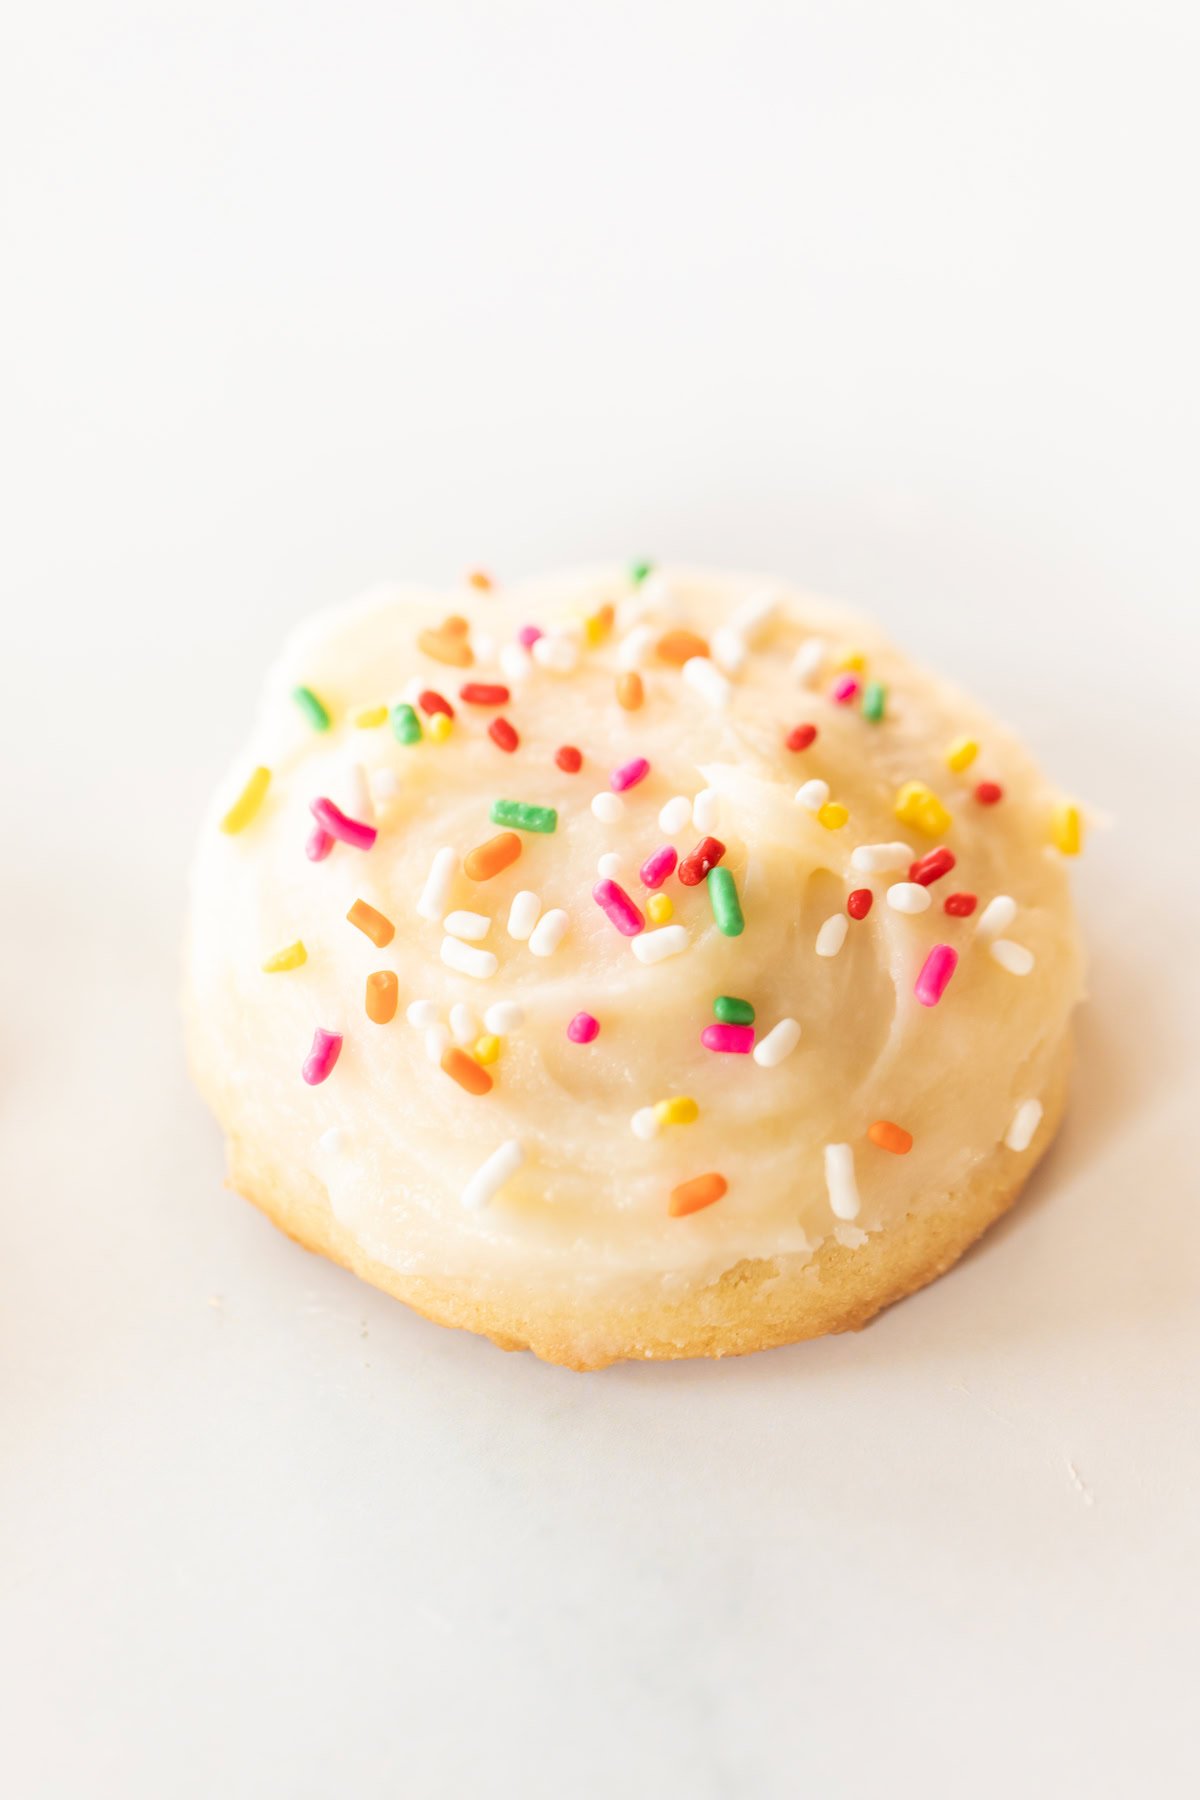 A round, frosted Amish sugar cookie topped with colorful sprinkles on a white background.